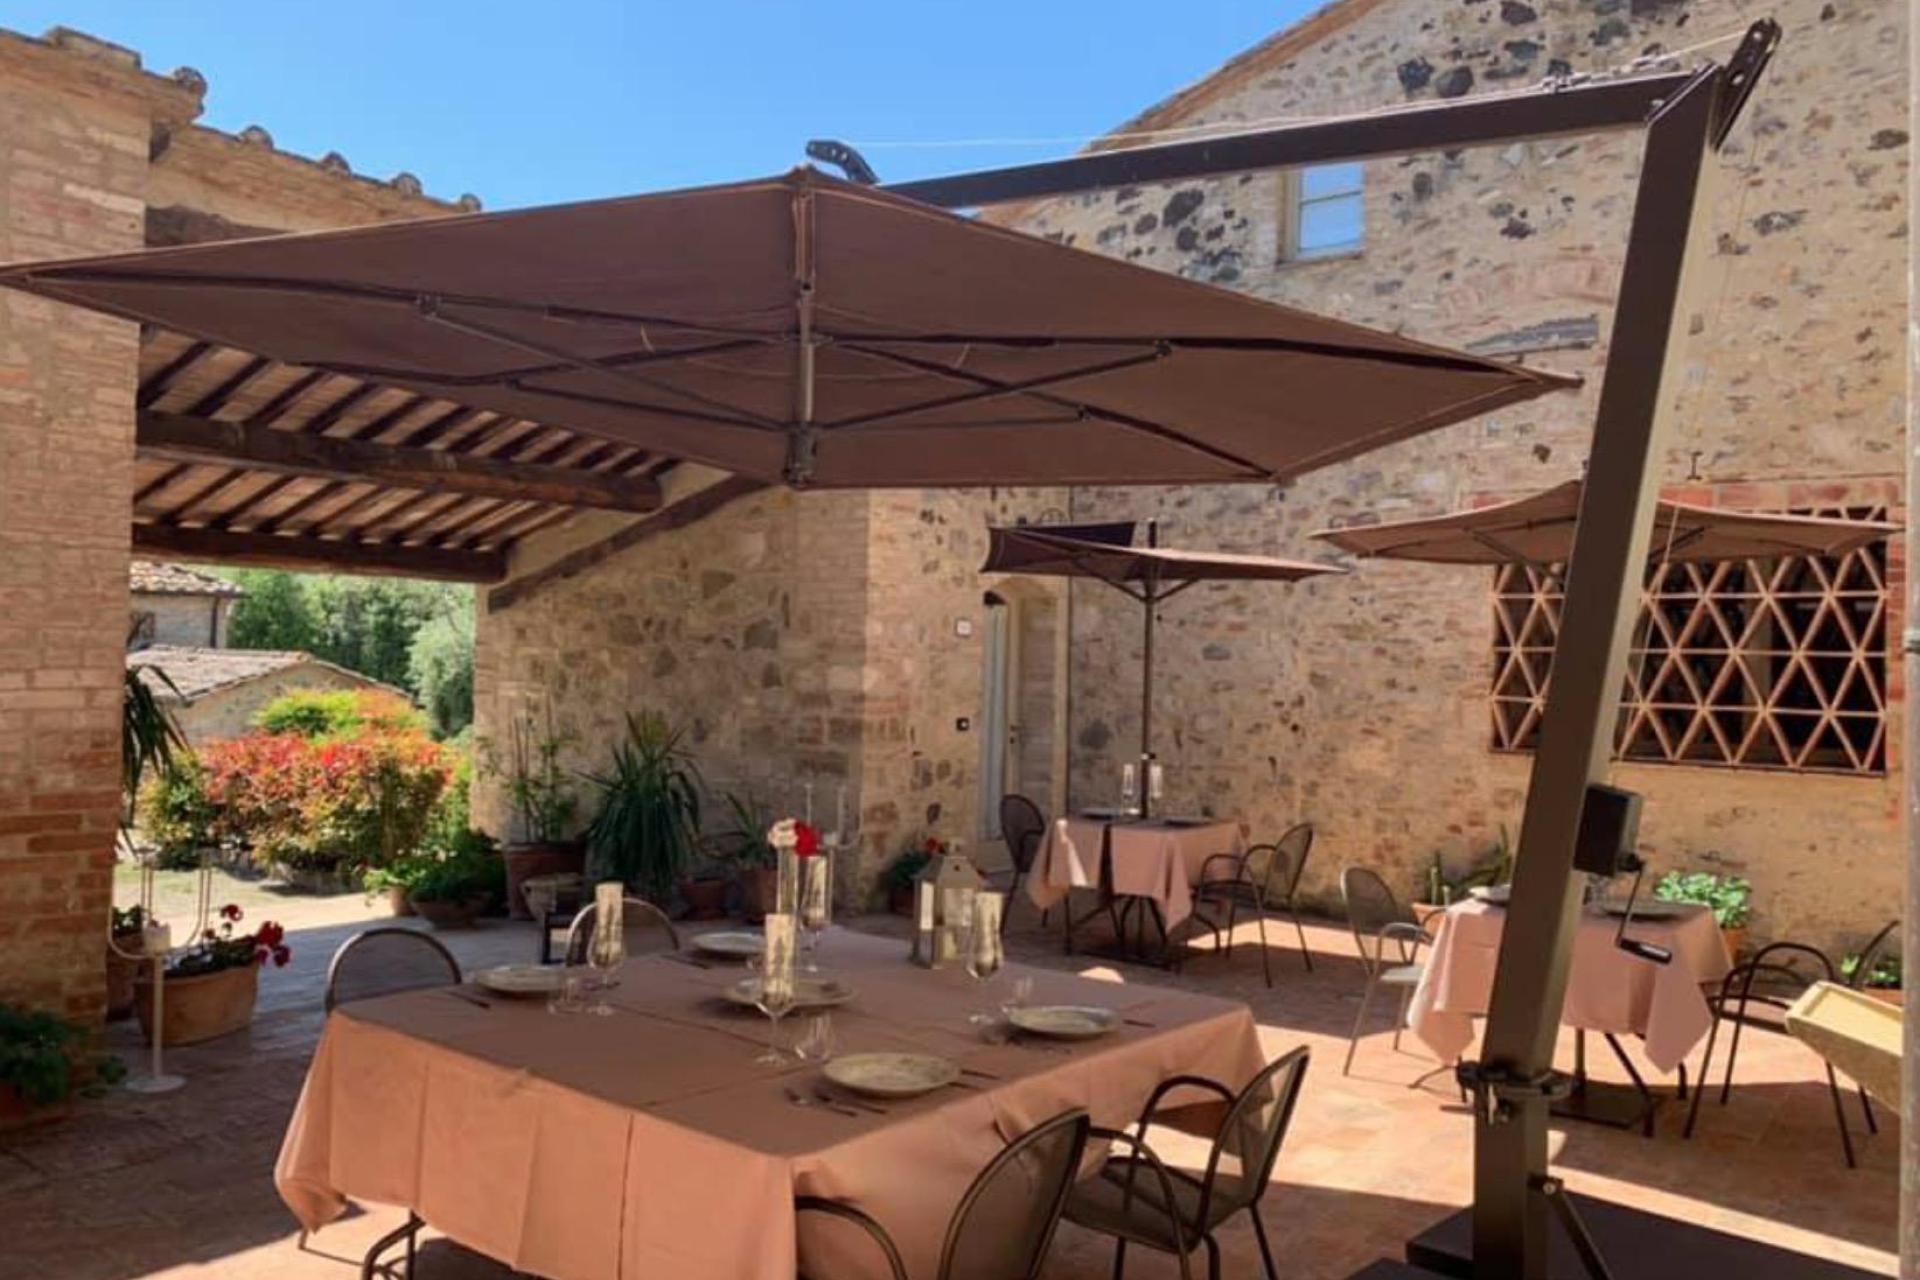 Agriturismo Tuscany Child-friendly agriturismo centrally located in Tuscany